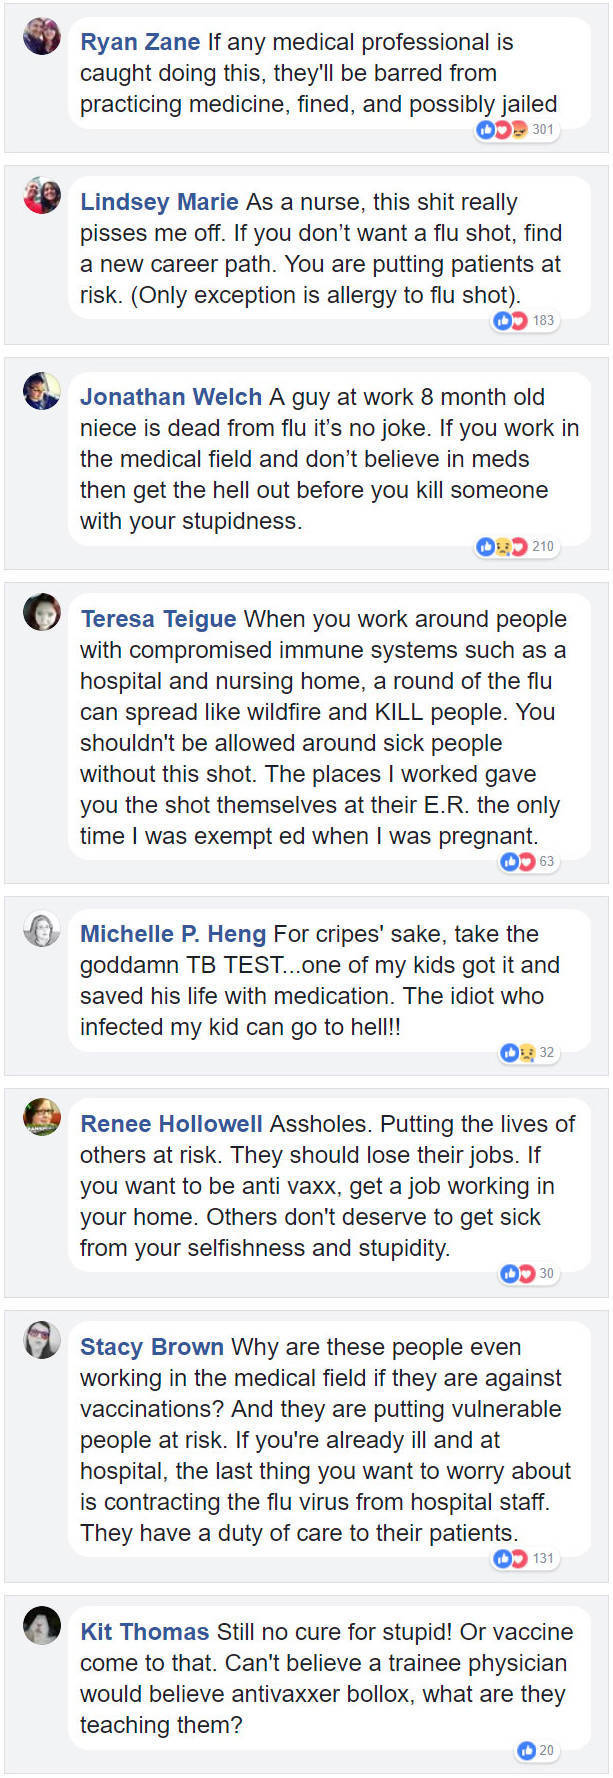 Anti-Vaxxers Share How To Avoid Mandatory Vaccines Required To Work In Healthcare